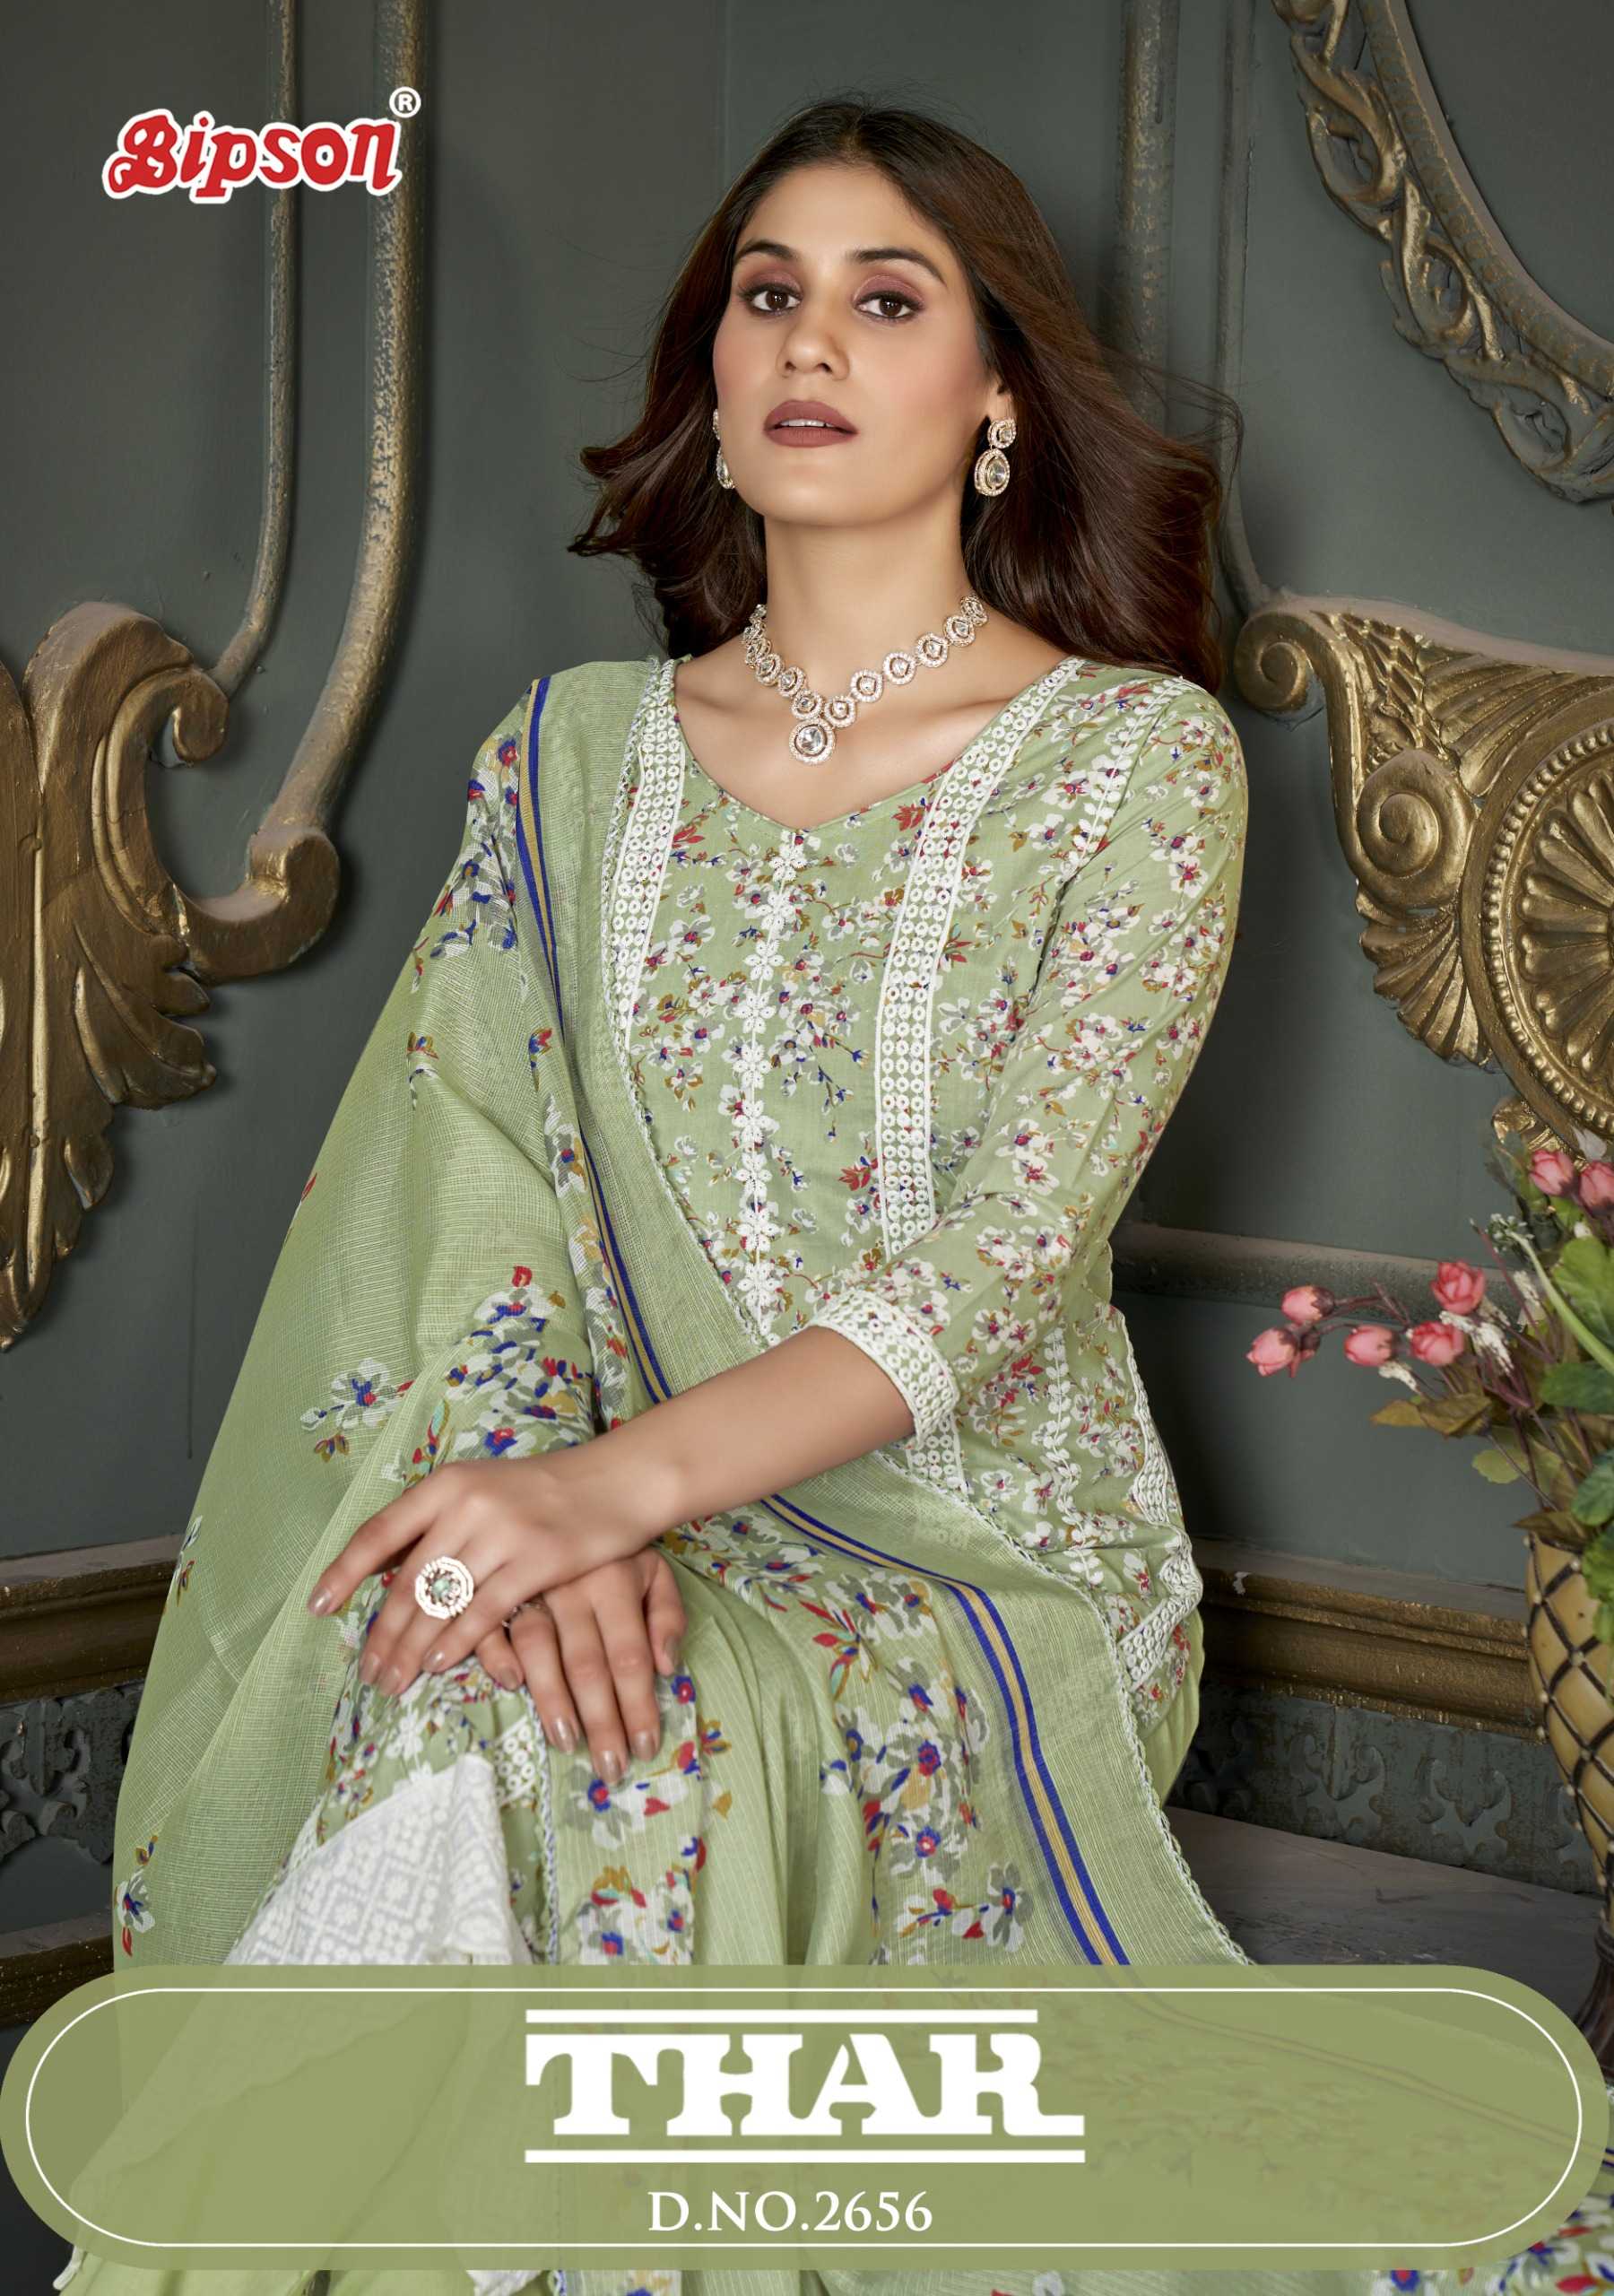 bipson print thar 2656 arriving pure cotton solid  kota chex print dress material 